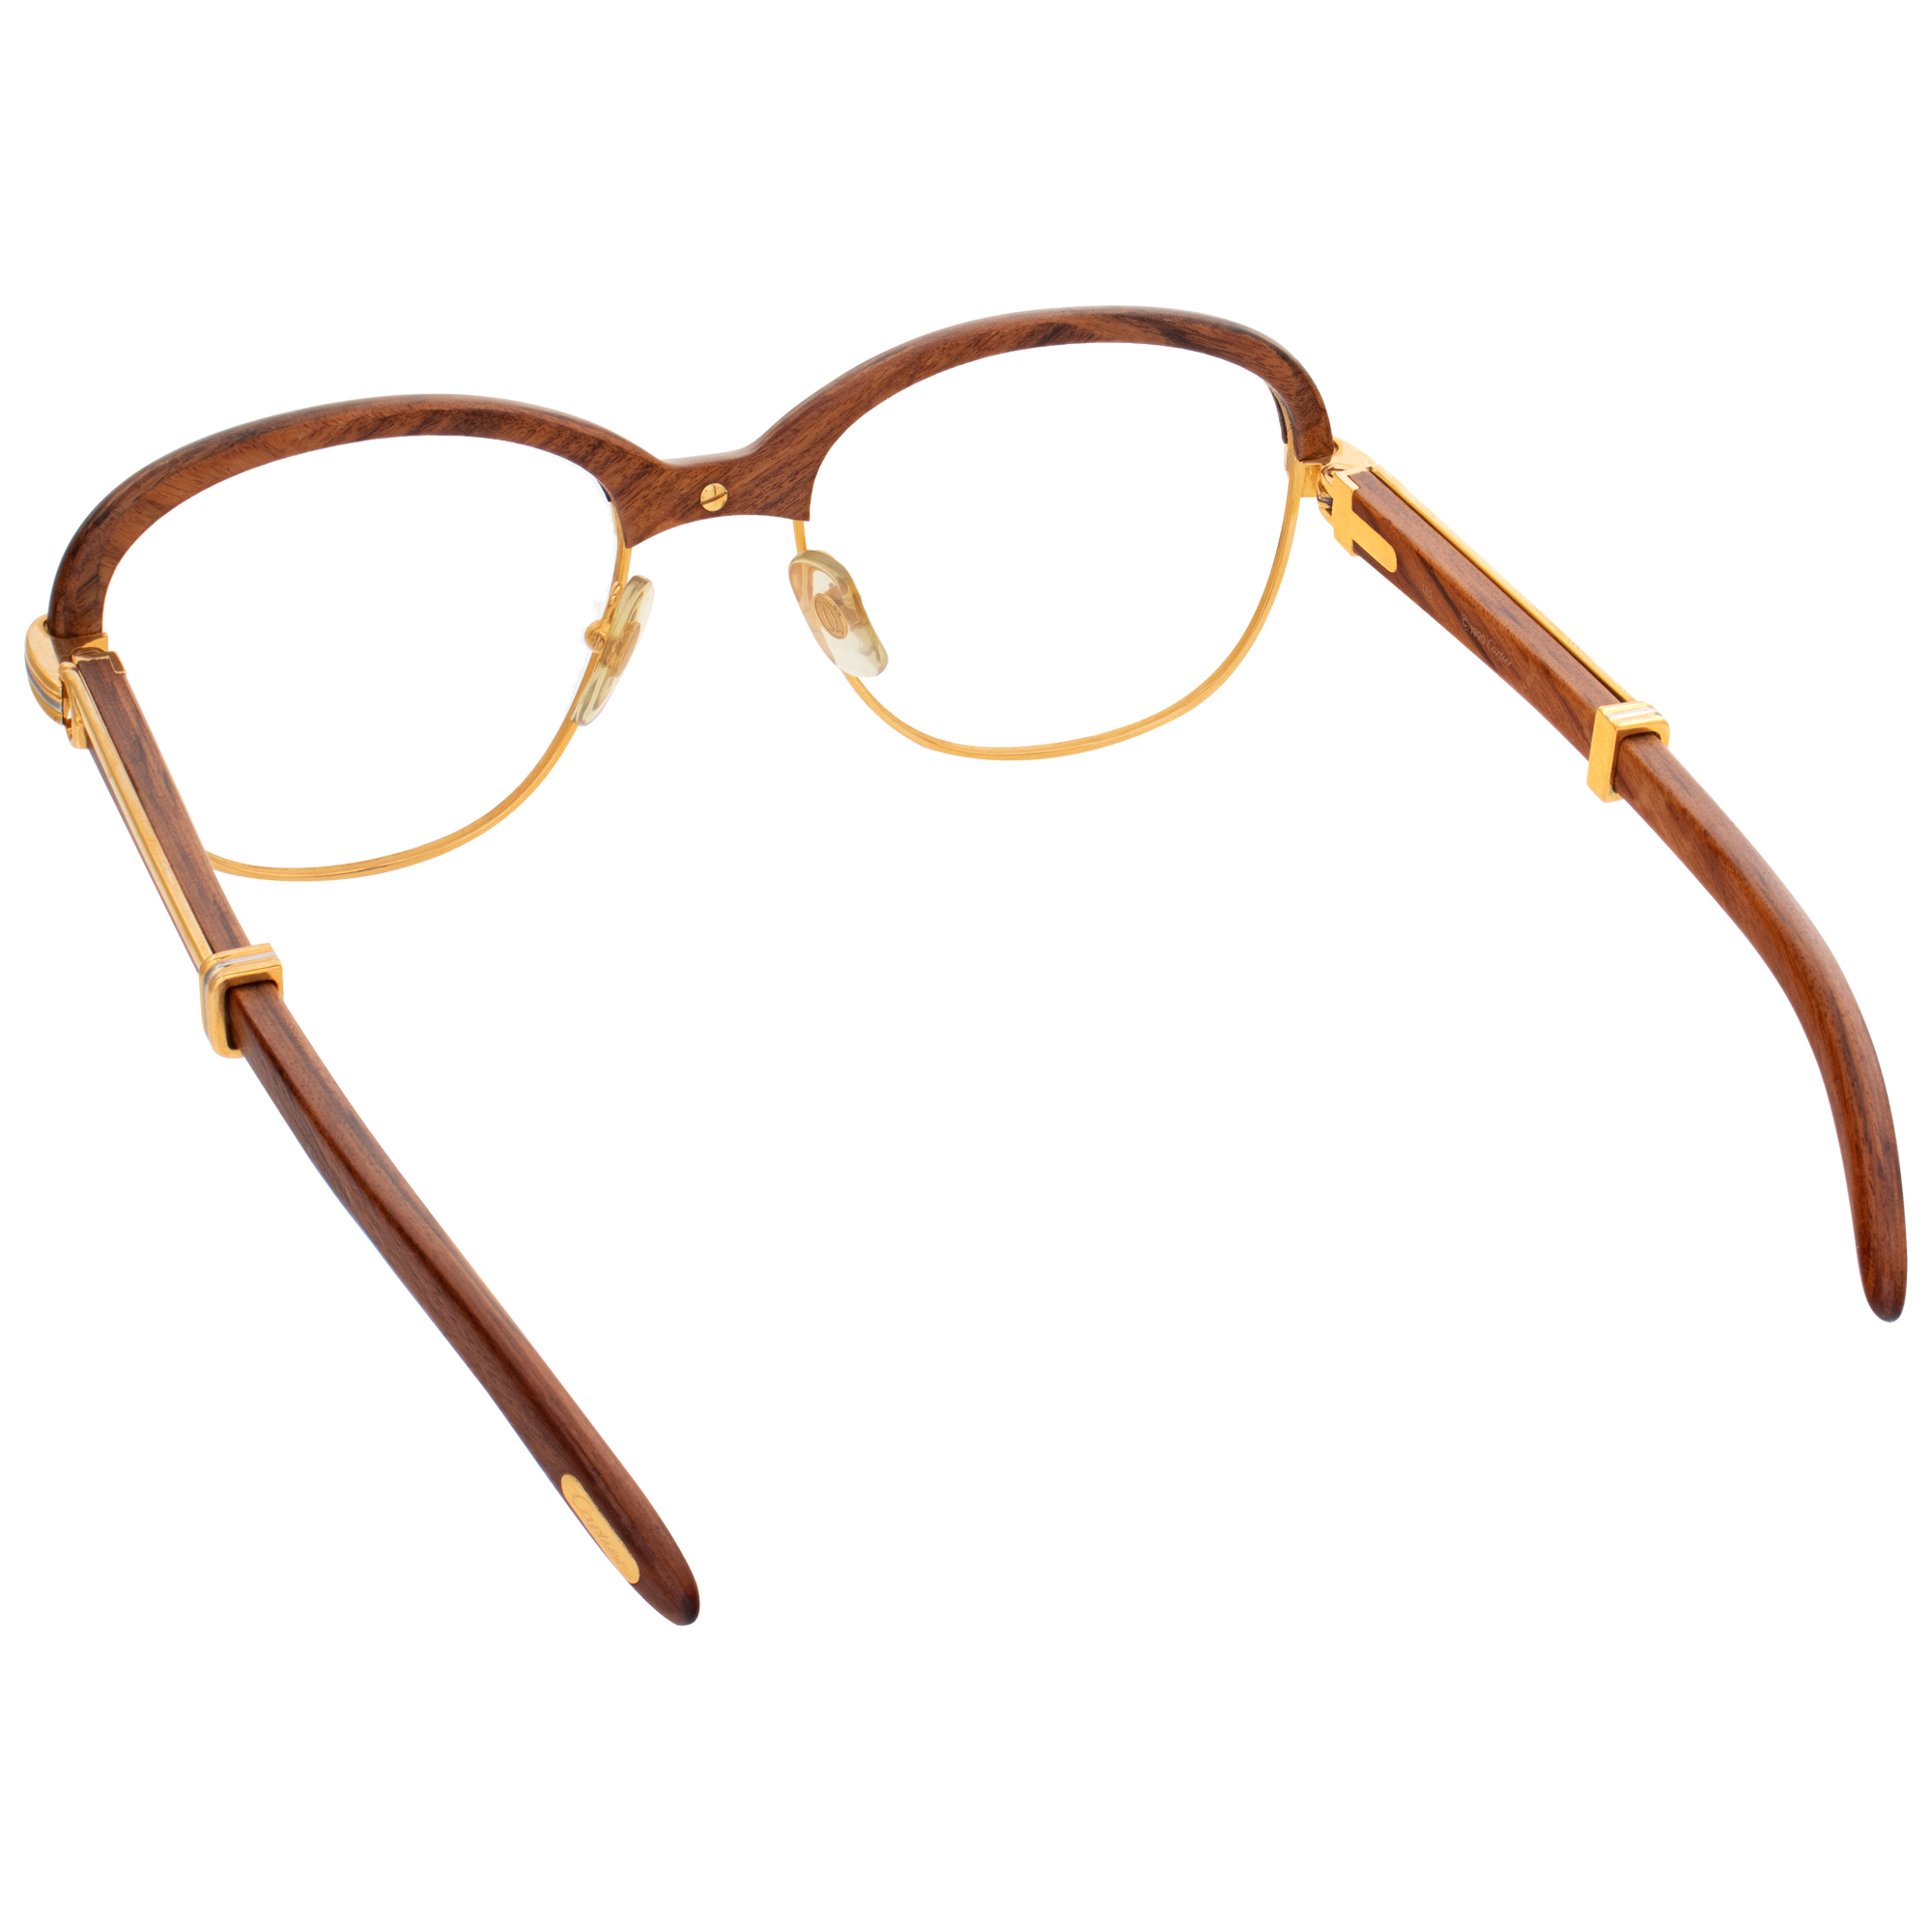 Cartier "Malmaison" collection, Palisander Rosewood & gold glasses. Circa 1990 image 4